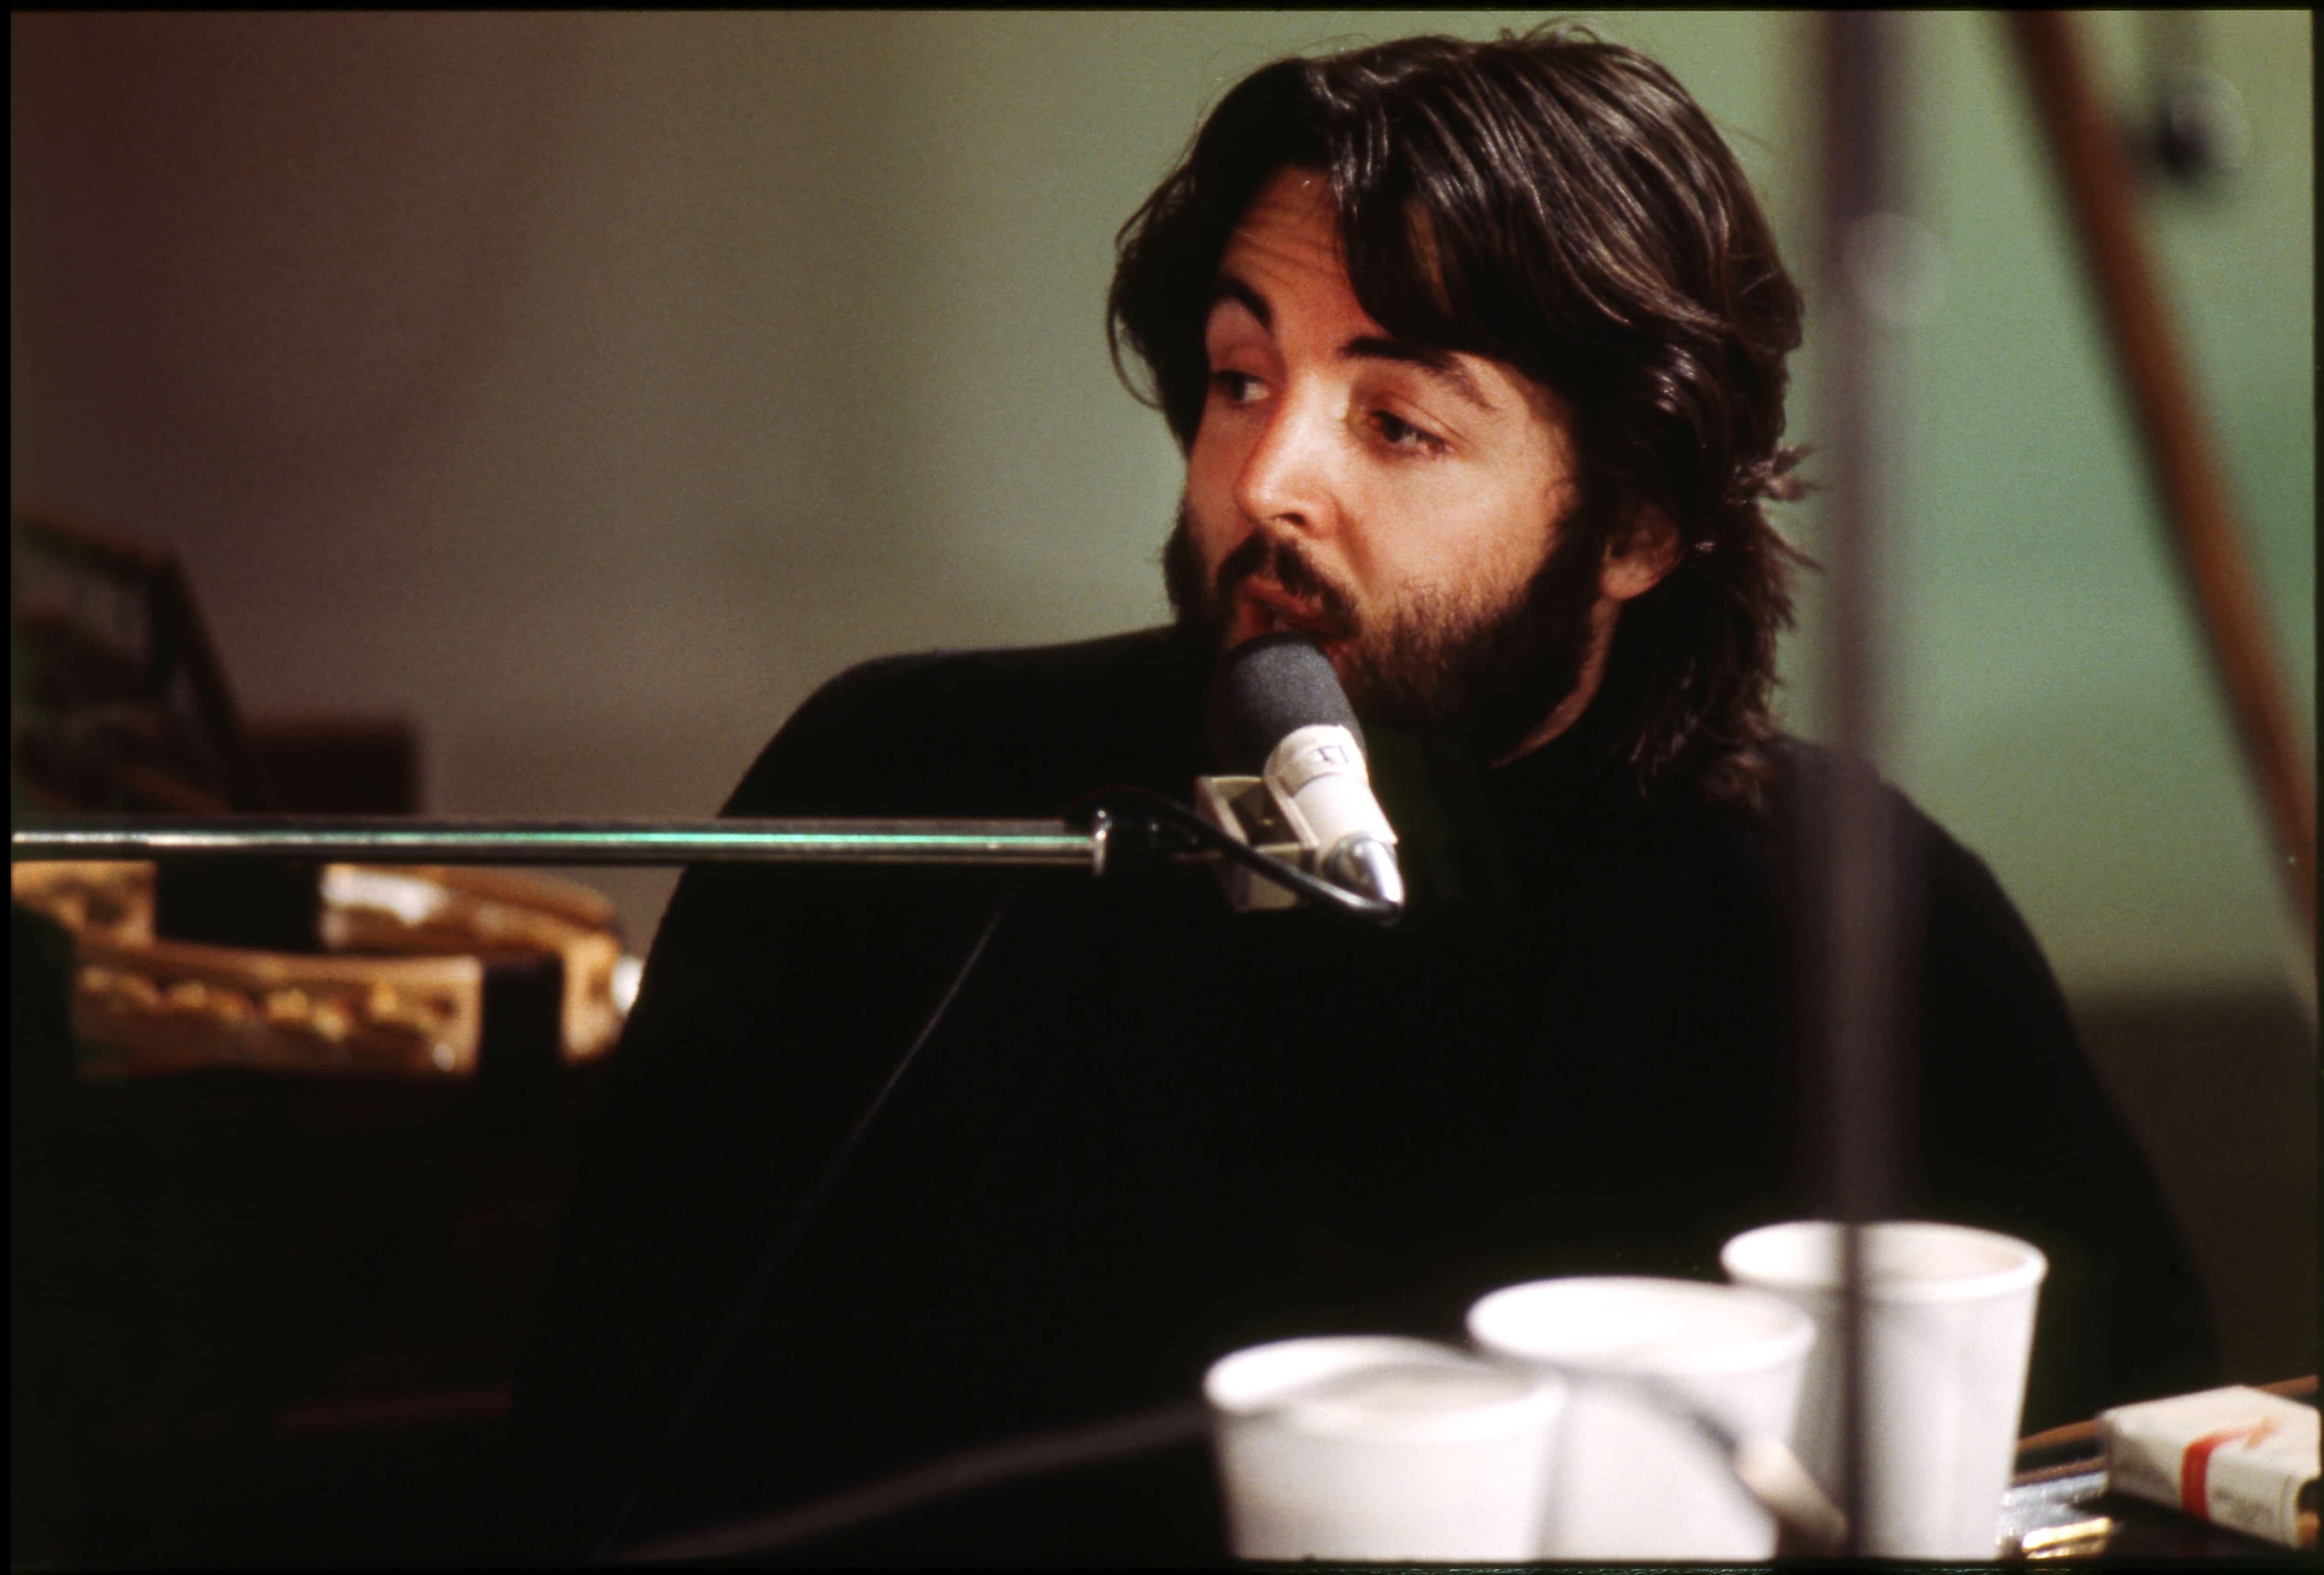 A bearded Paul sits at a piano singing into a microphone, with cups of tea balanced in front of him